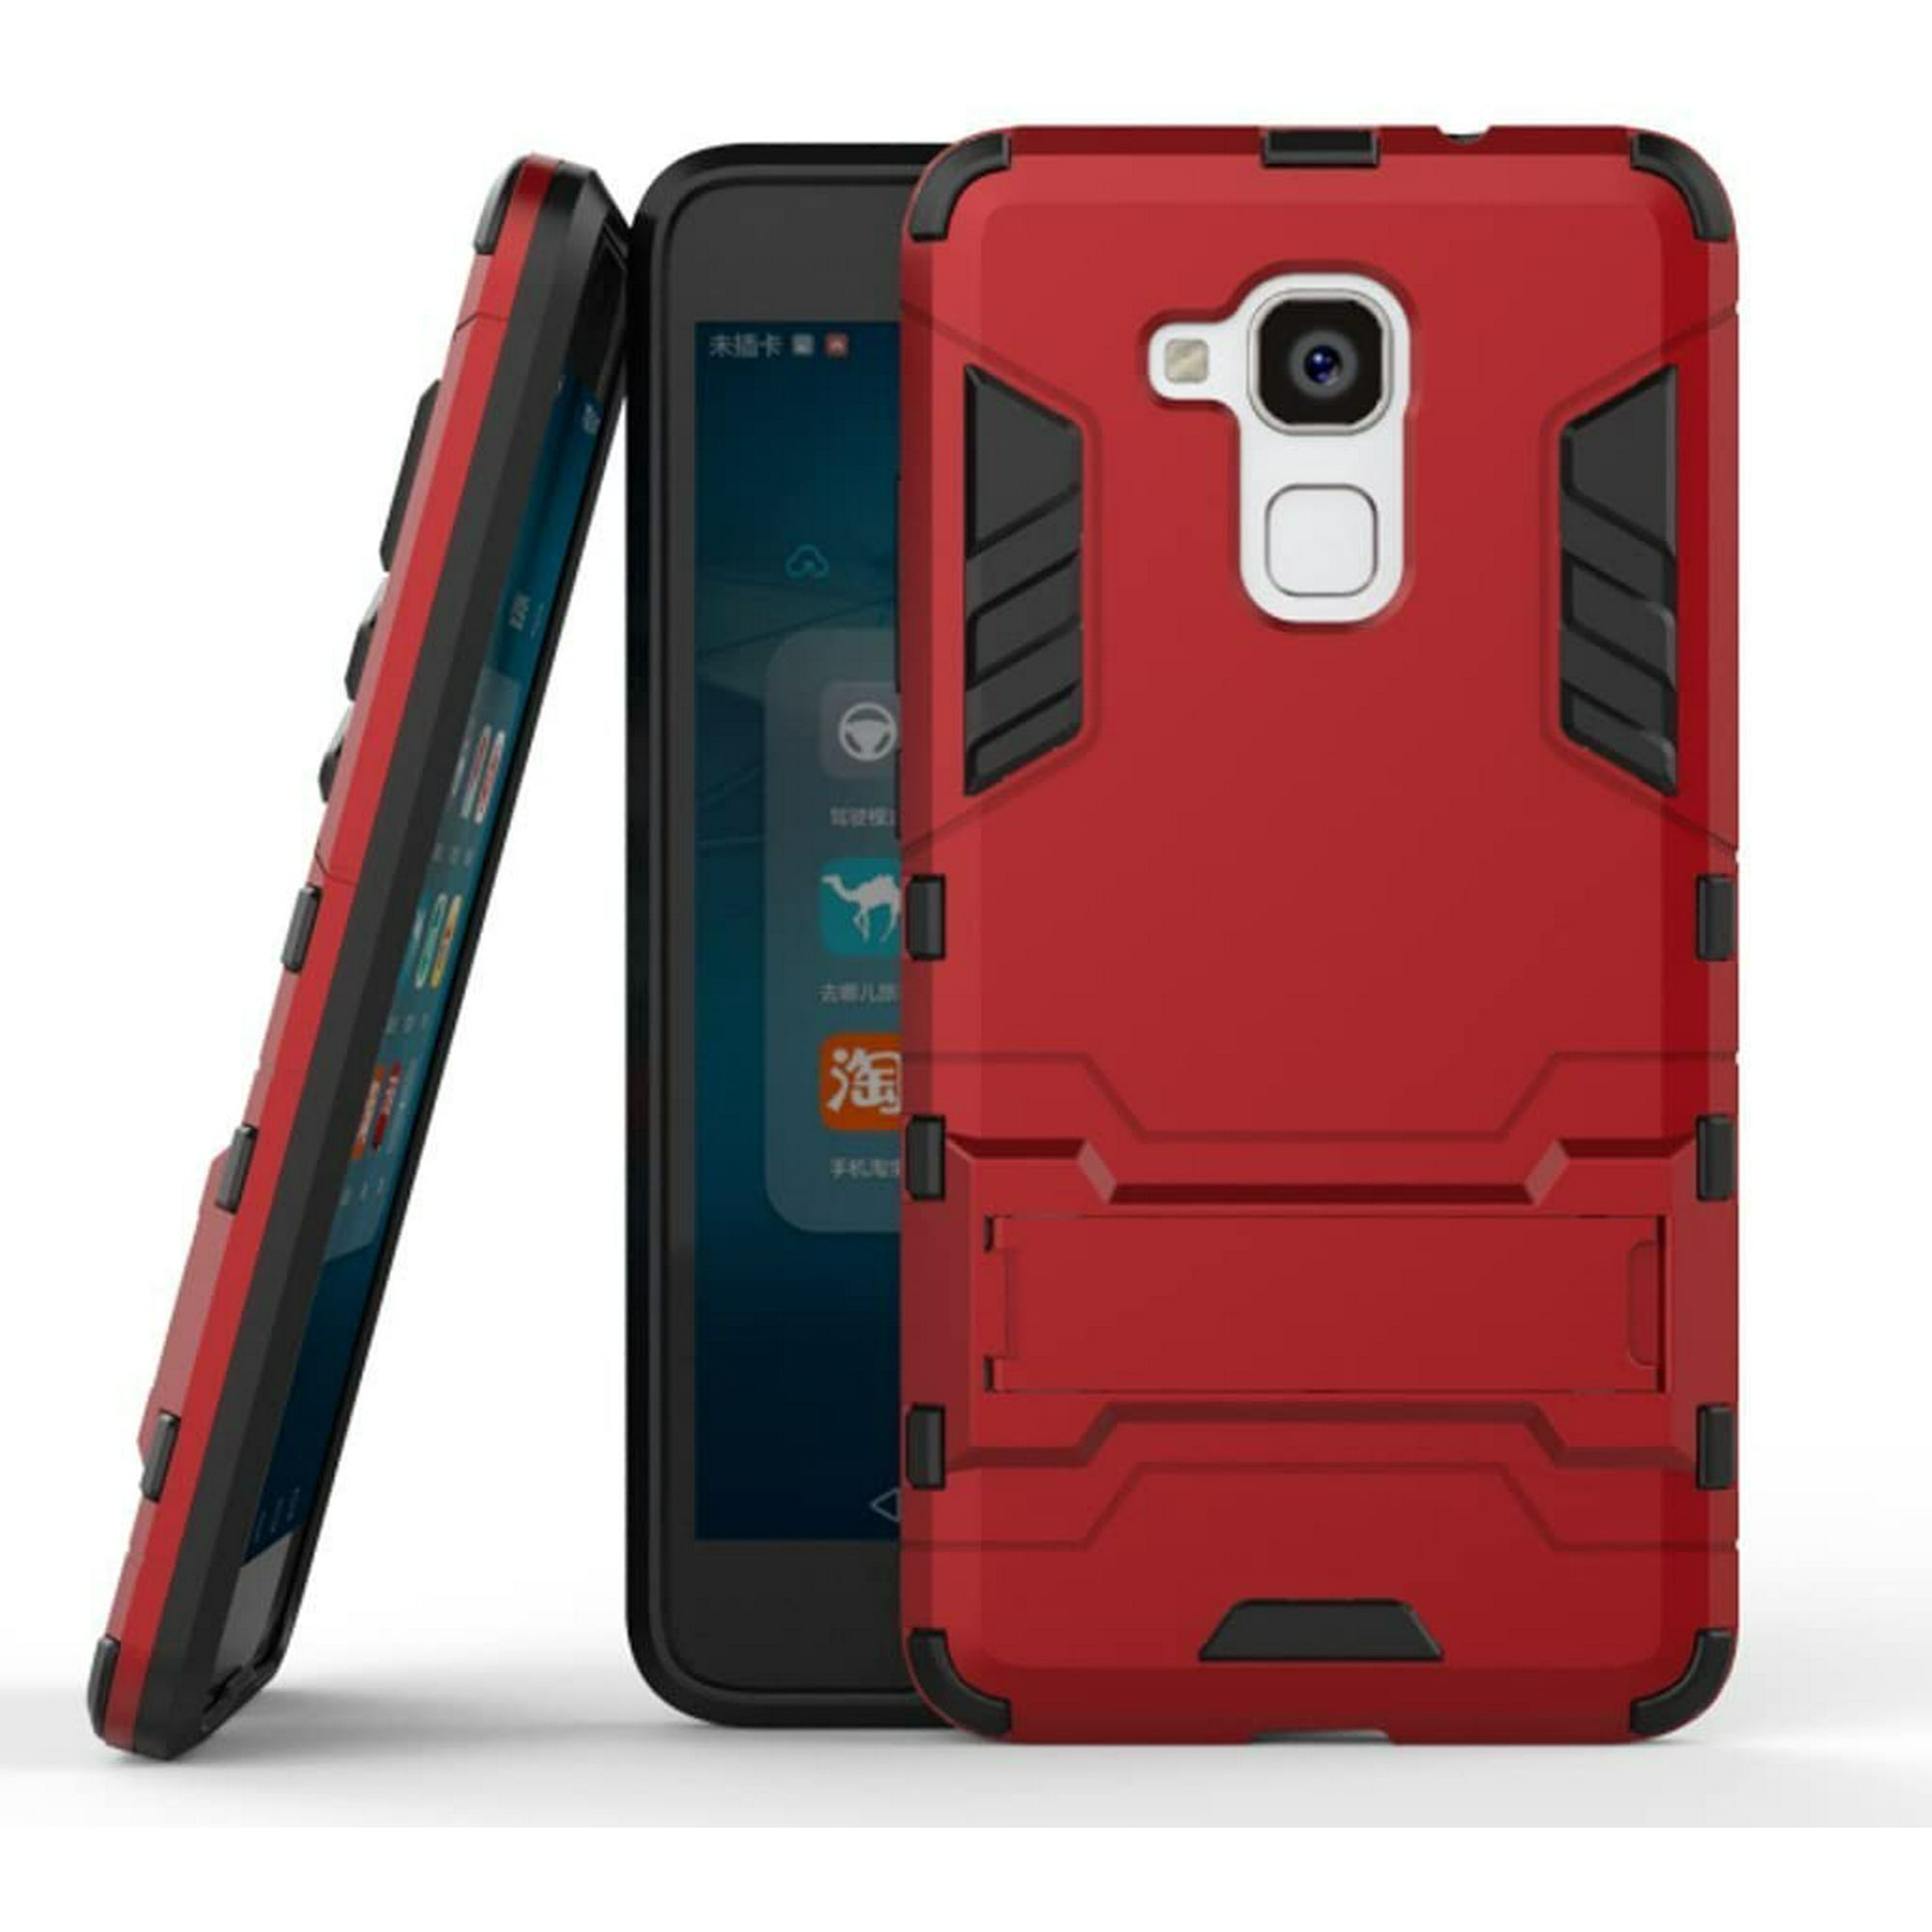 Waakzaam Bengelen Sortie Case for Honor 5C / Honor 7 Lite/Huawei GT3 (5.2 inch) 2 in 1 Shockproof  with Kickstand Feature Hybrid Dual Layer Armor Defender Protective Cover  (Red) Red | Walmart Canada